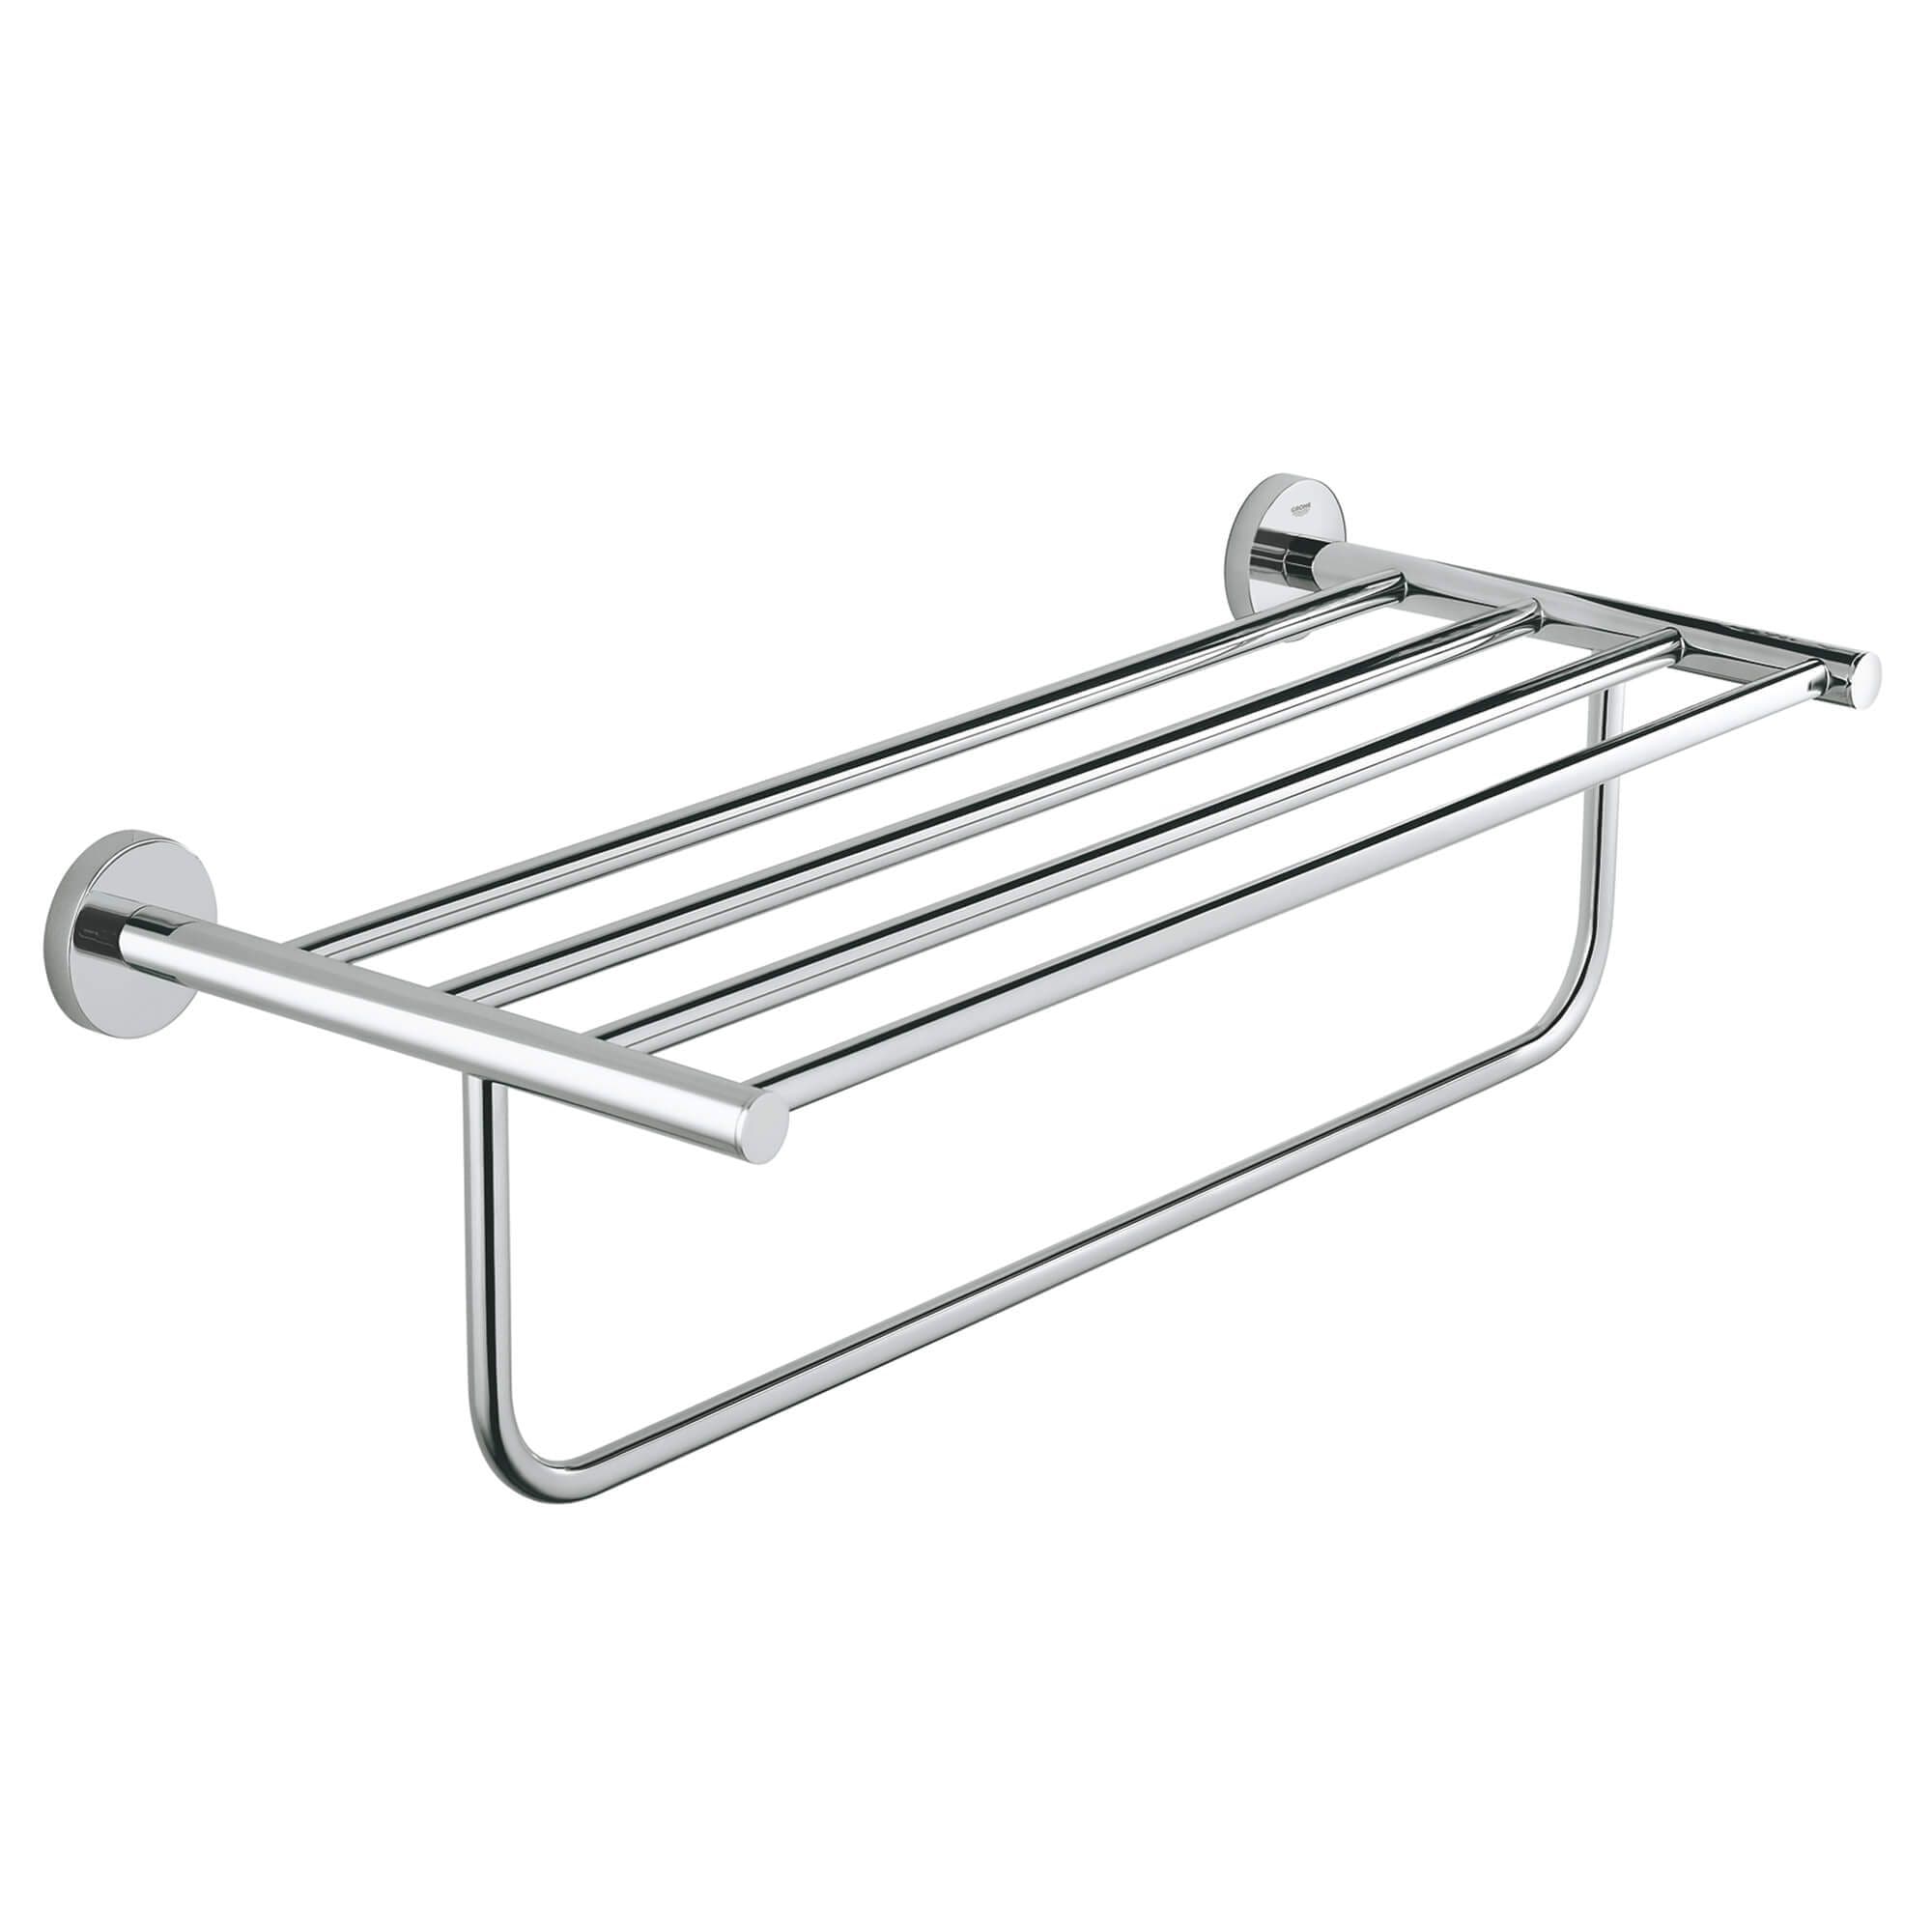 GROHE Towel Rack Essentials Authentic with 5 Towel Bars in StarLight Chrome 8a1 